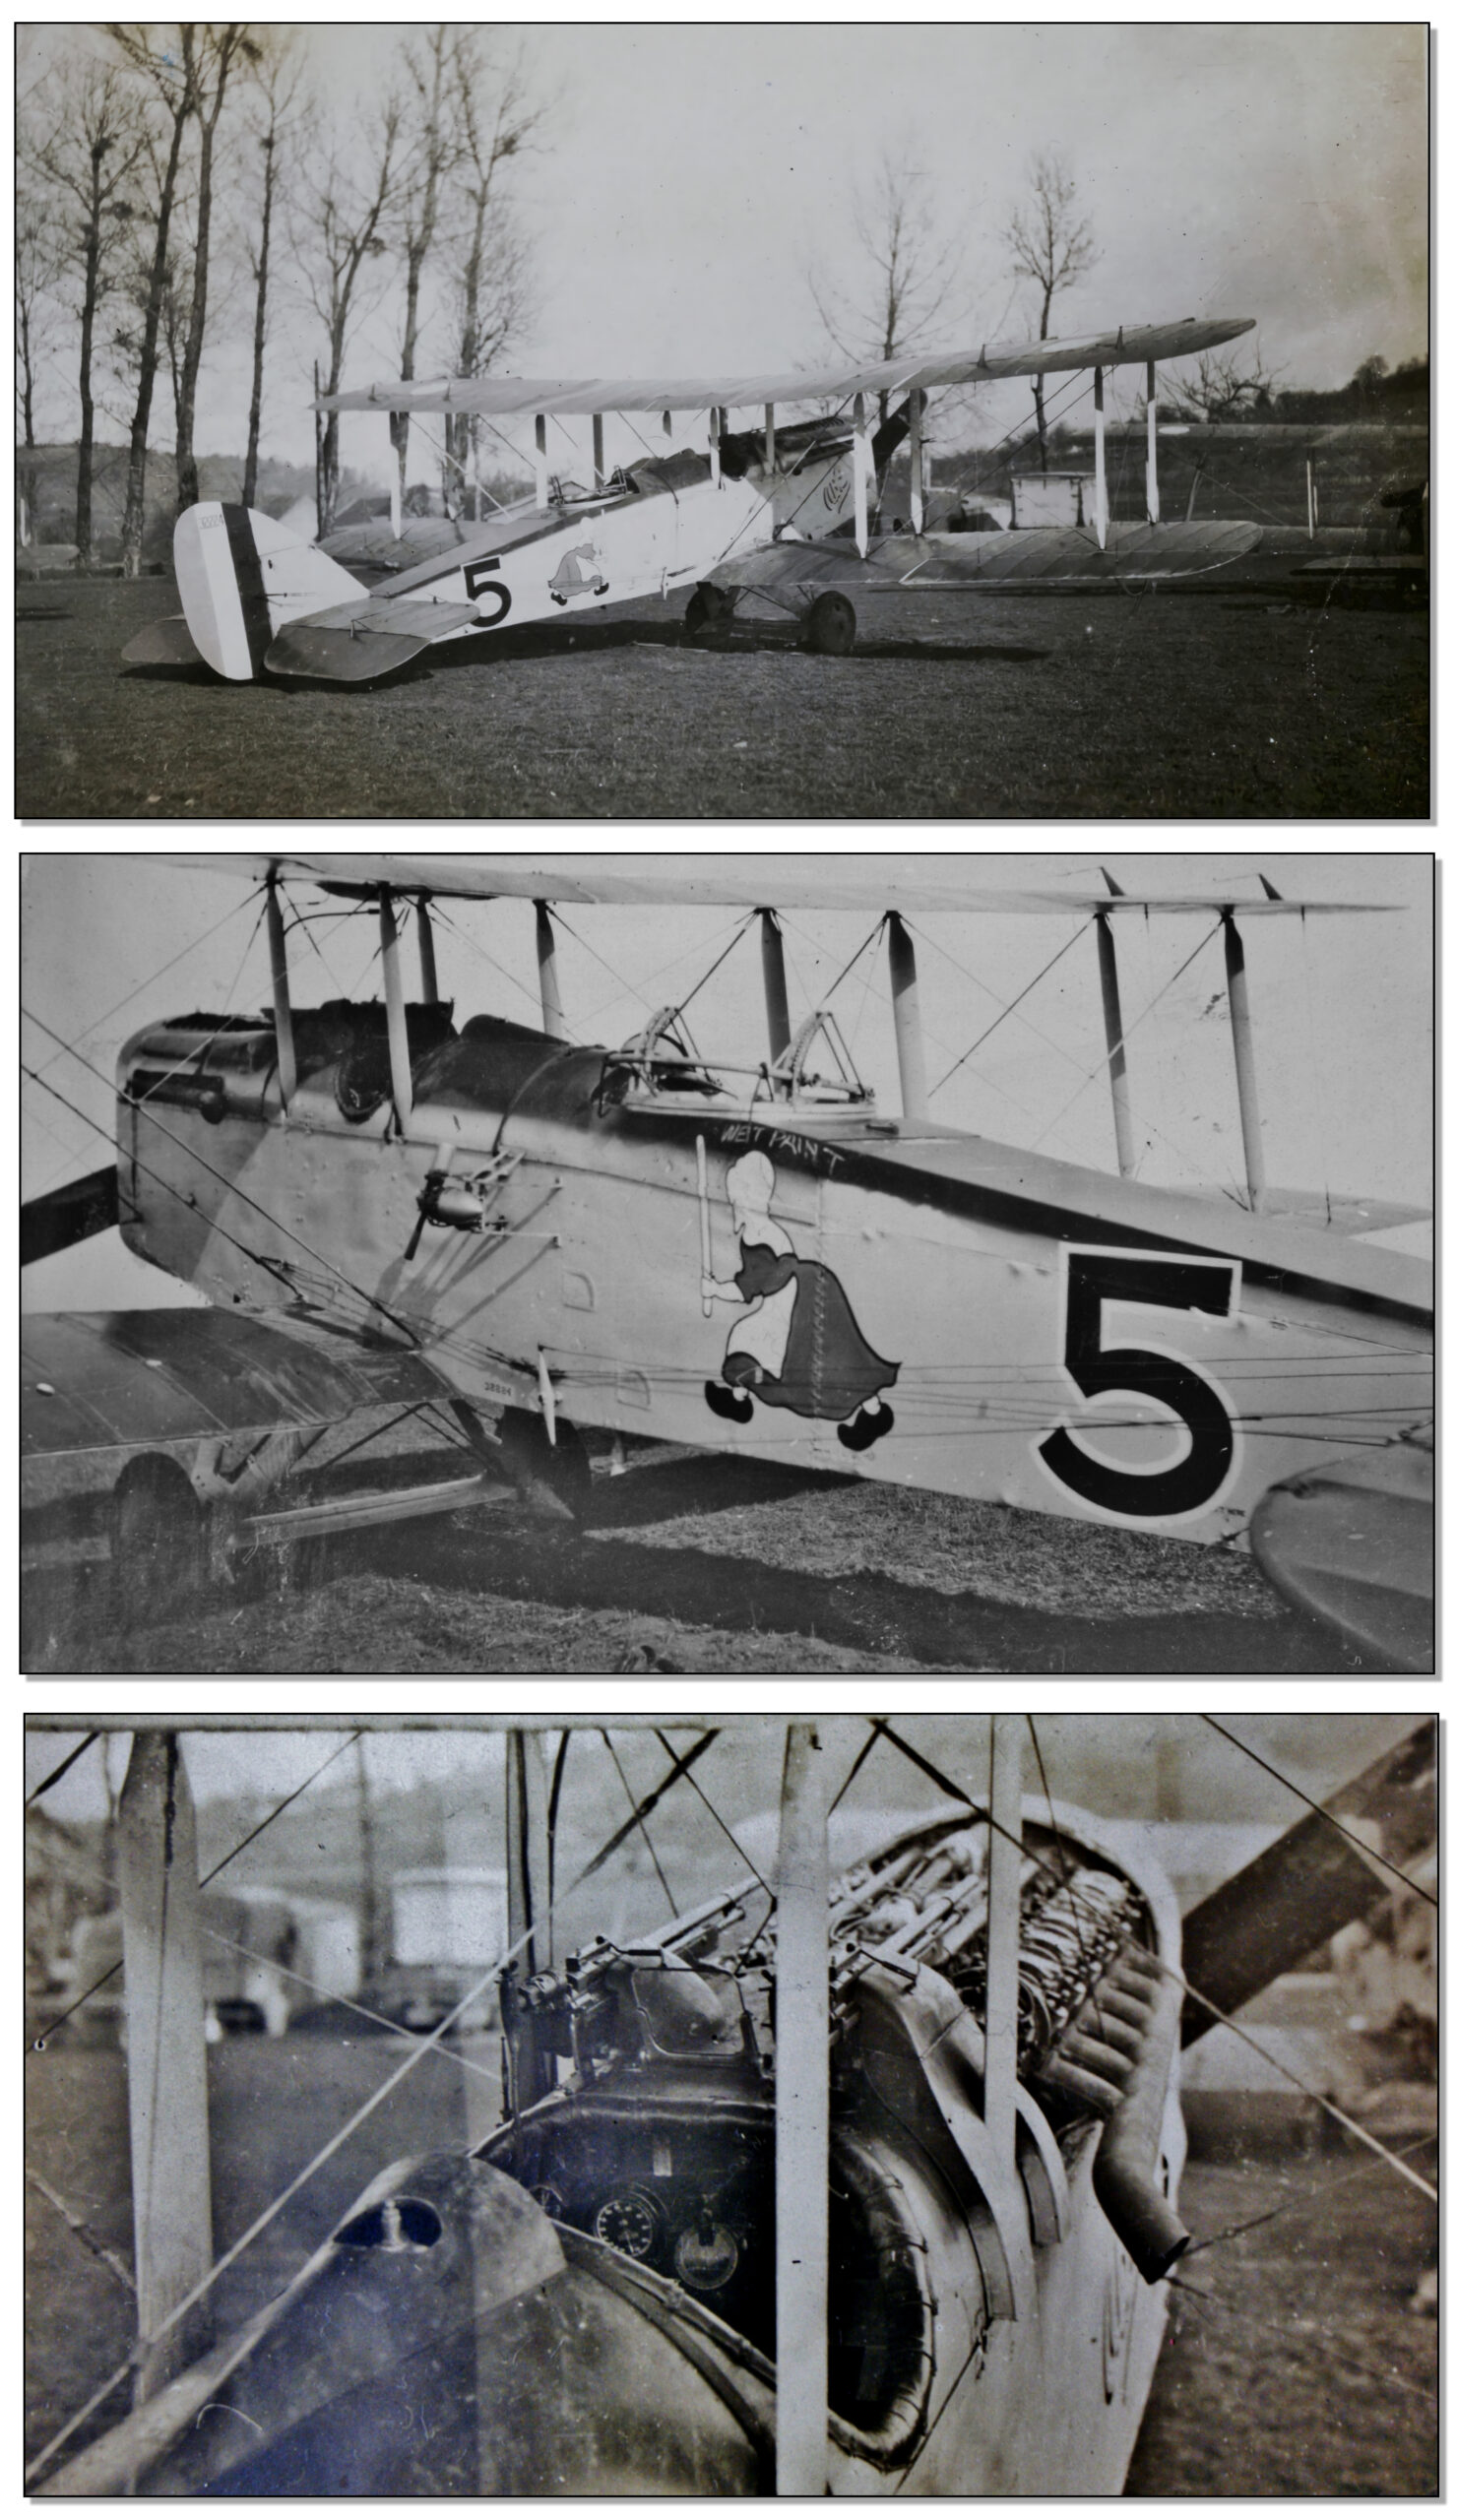 Three photos of Bill Frayne and Howard French’s DH-4, most likely that which was provided as a replacement for the one that crashed. Image courtesy Over the Front, League of World War One Aviation Historians, Arnold, Md., used with permission.